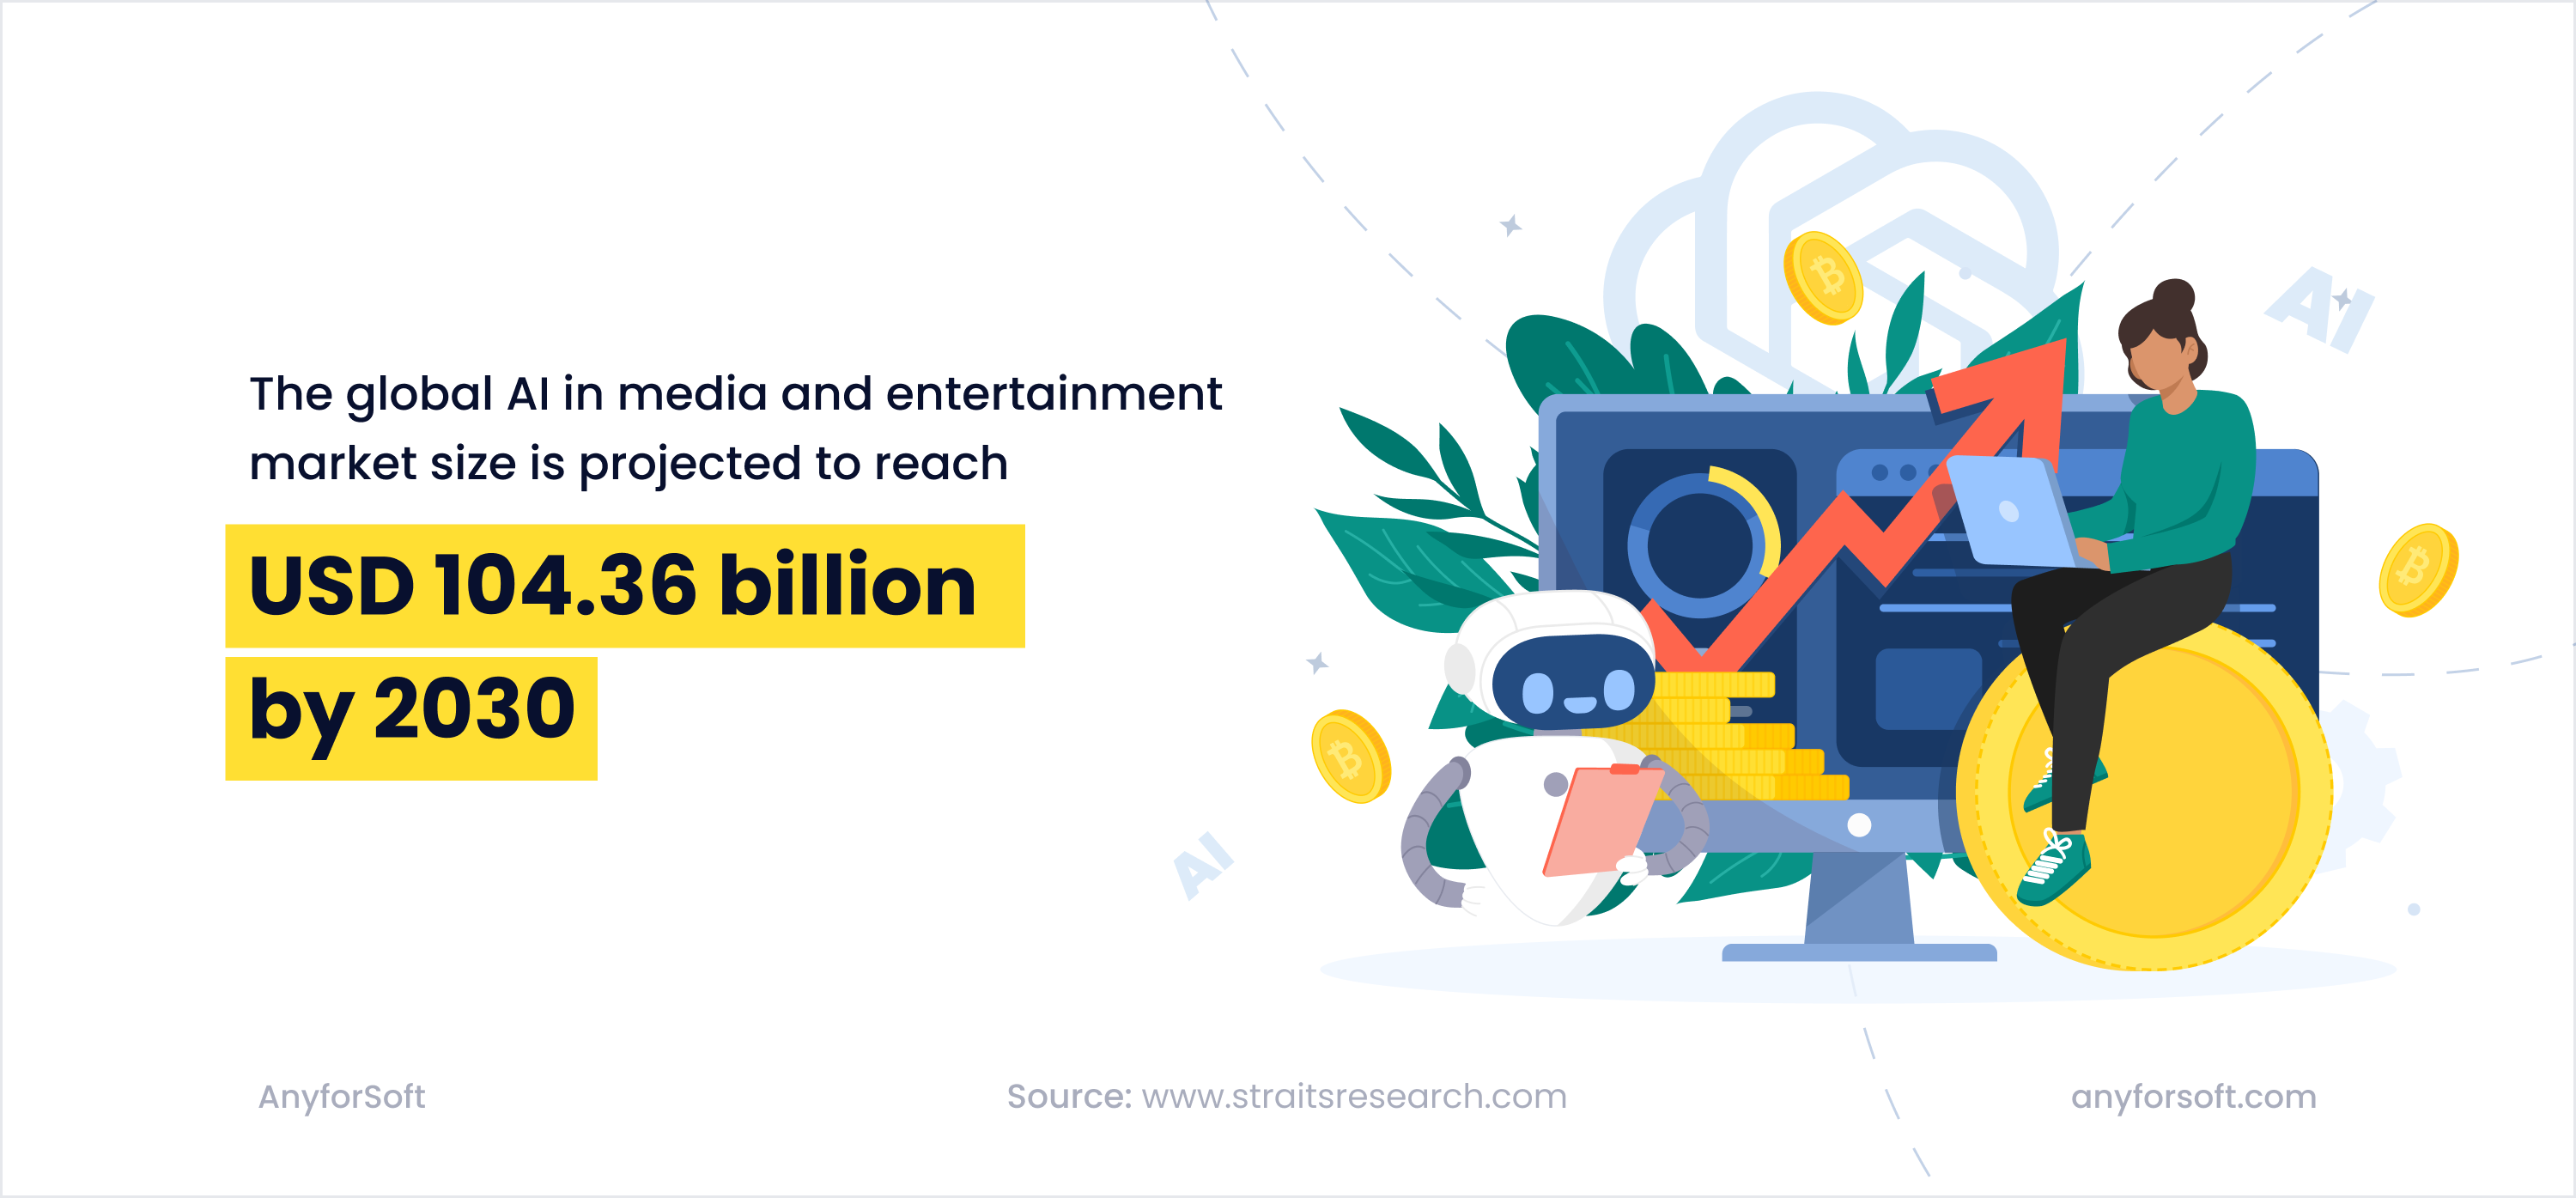 The global AI in media & entertainment market size